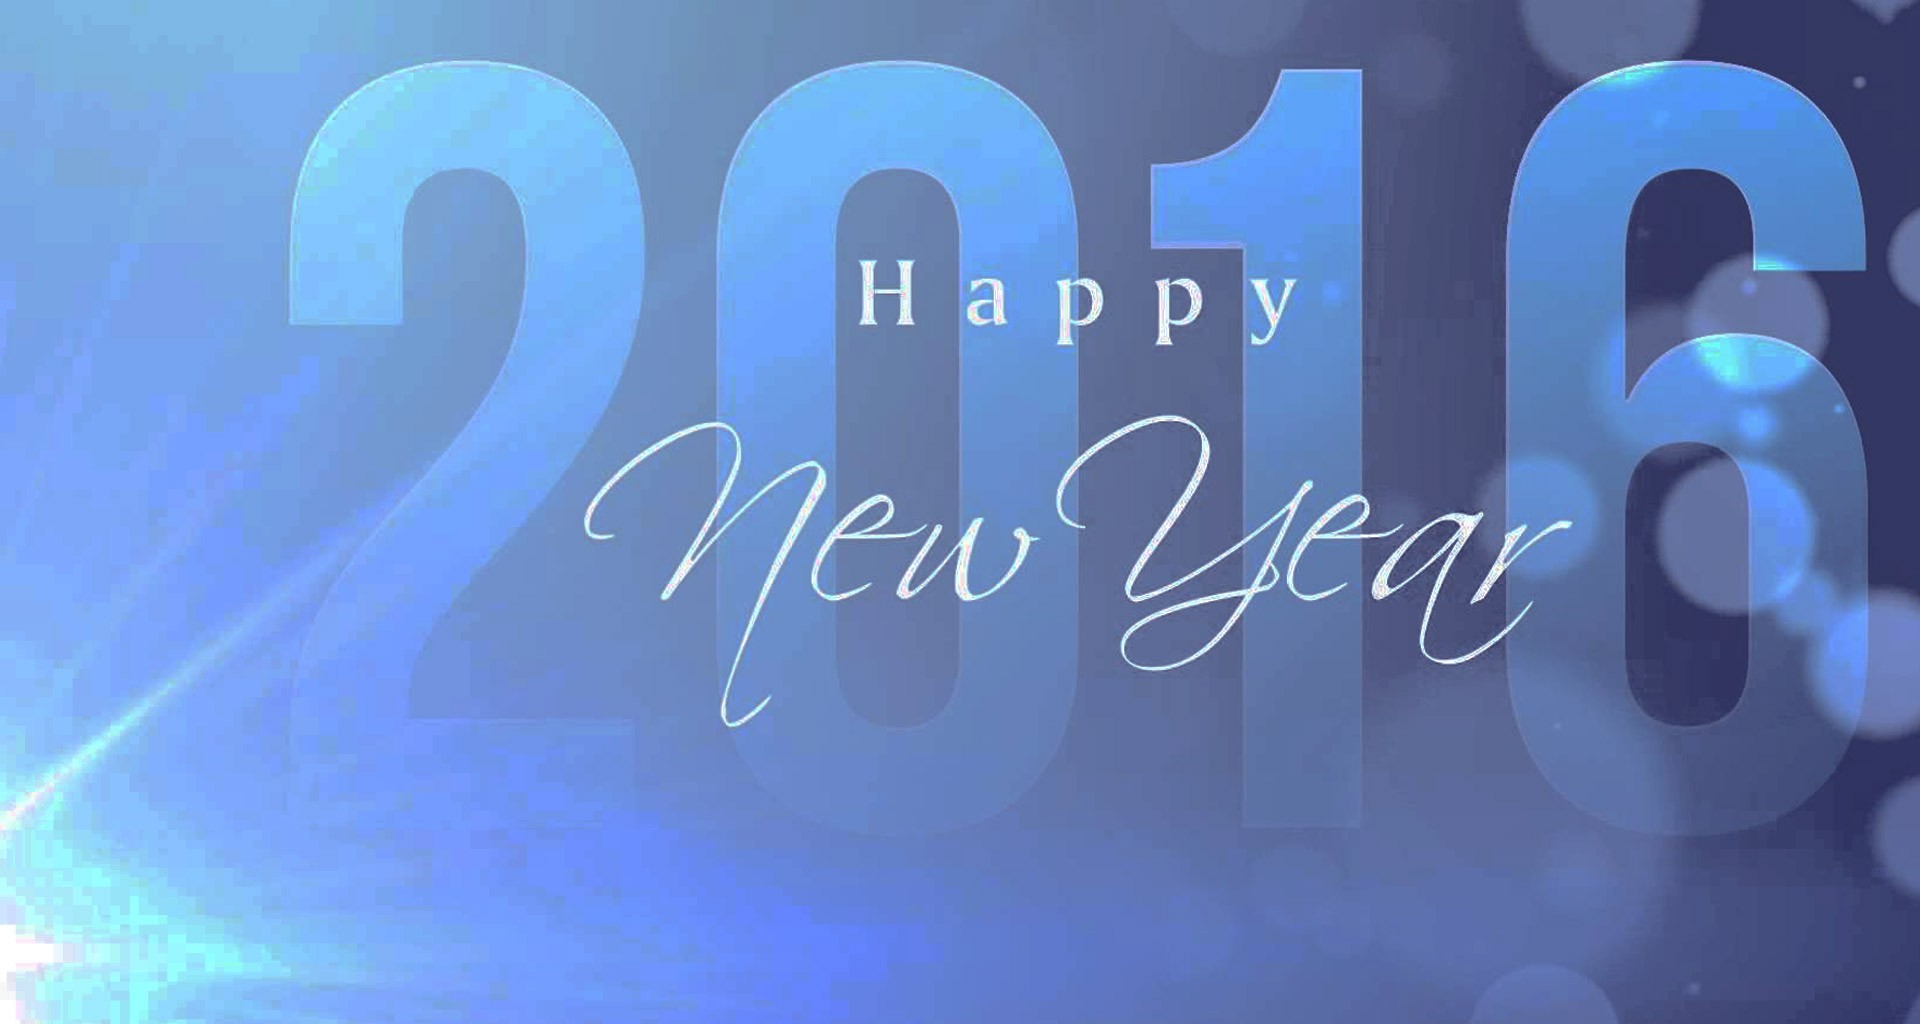 Happy New Year 2016 Desktop Wallpapers   Welcome Happy New Year 2016 1920x1024